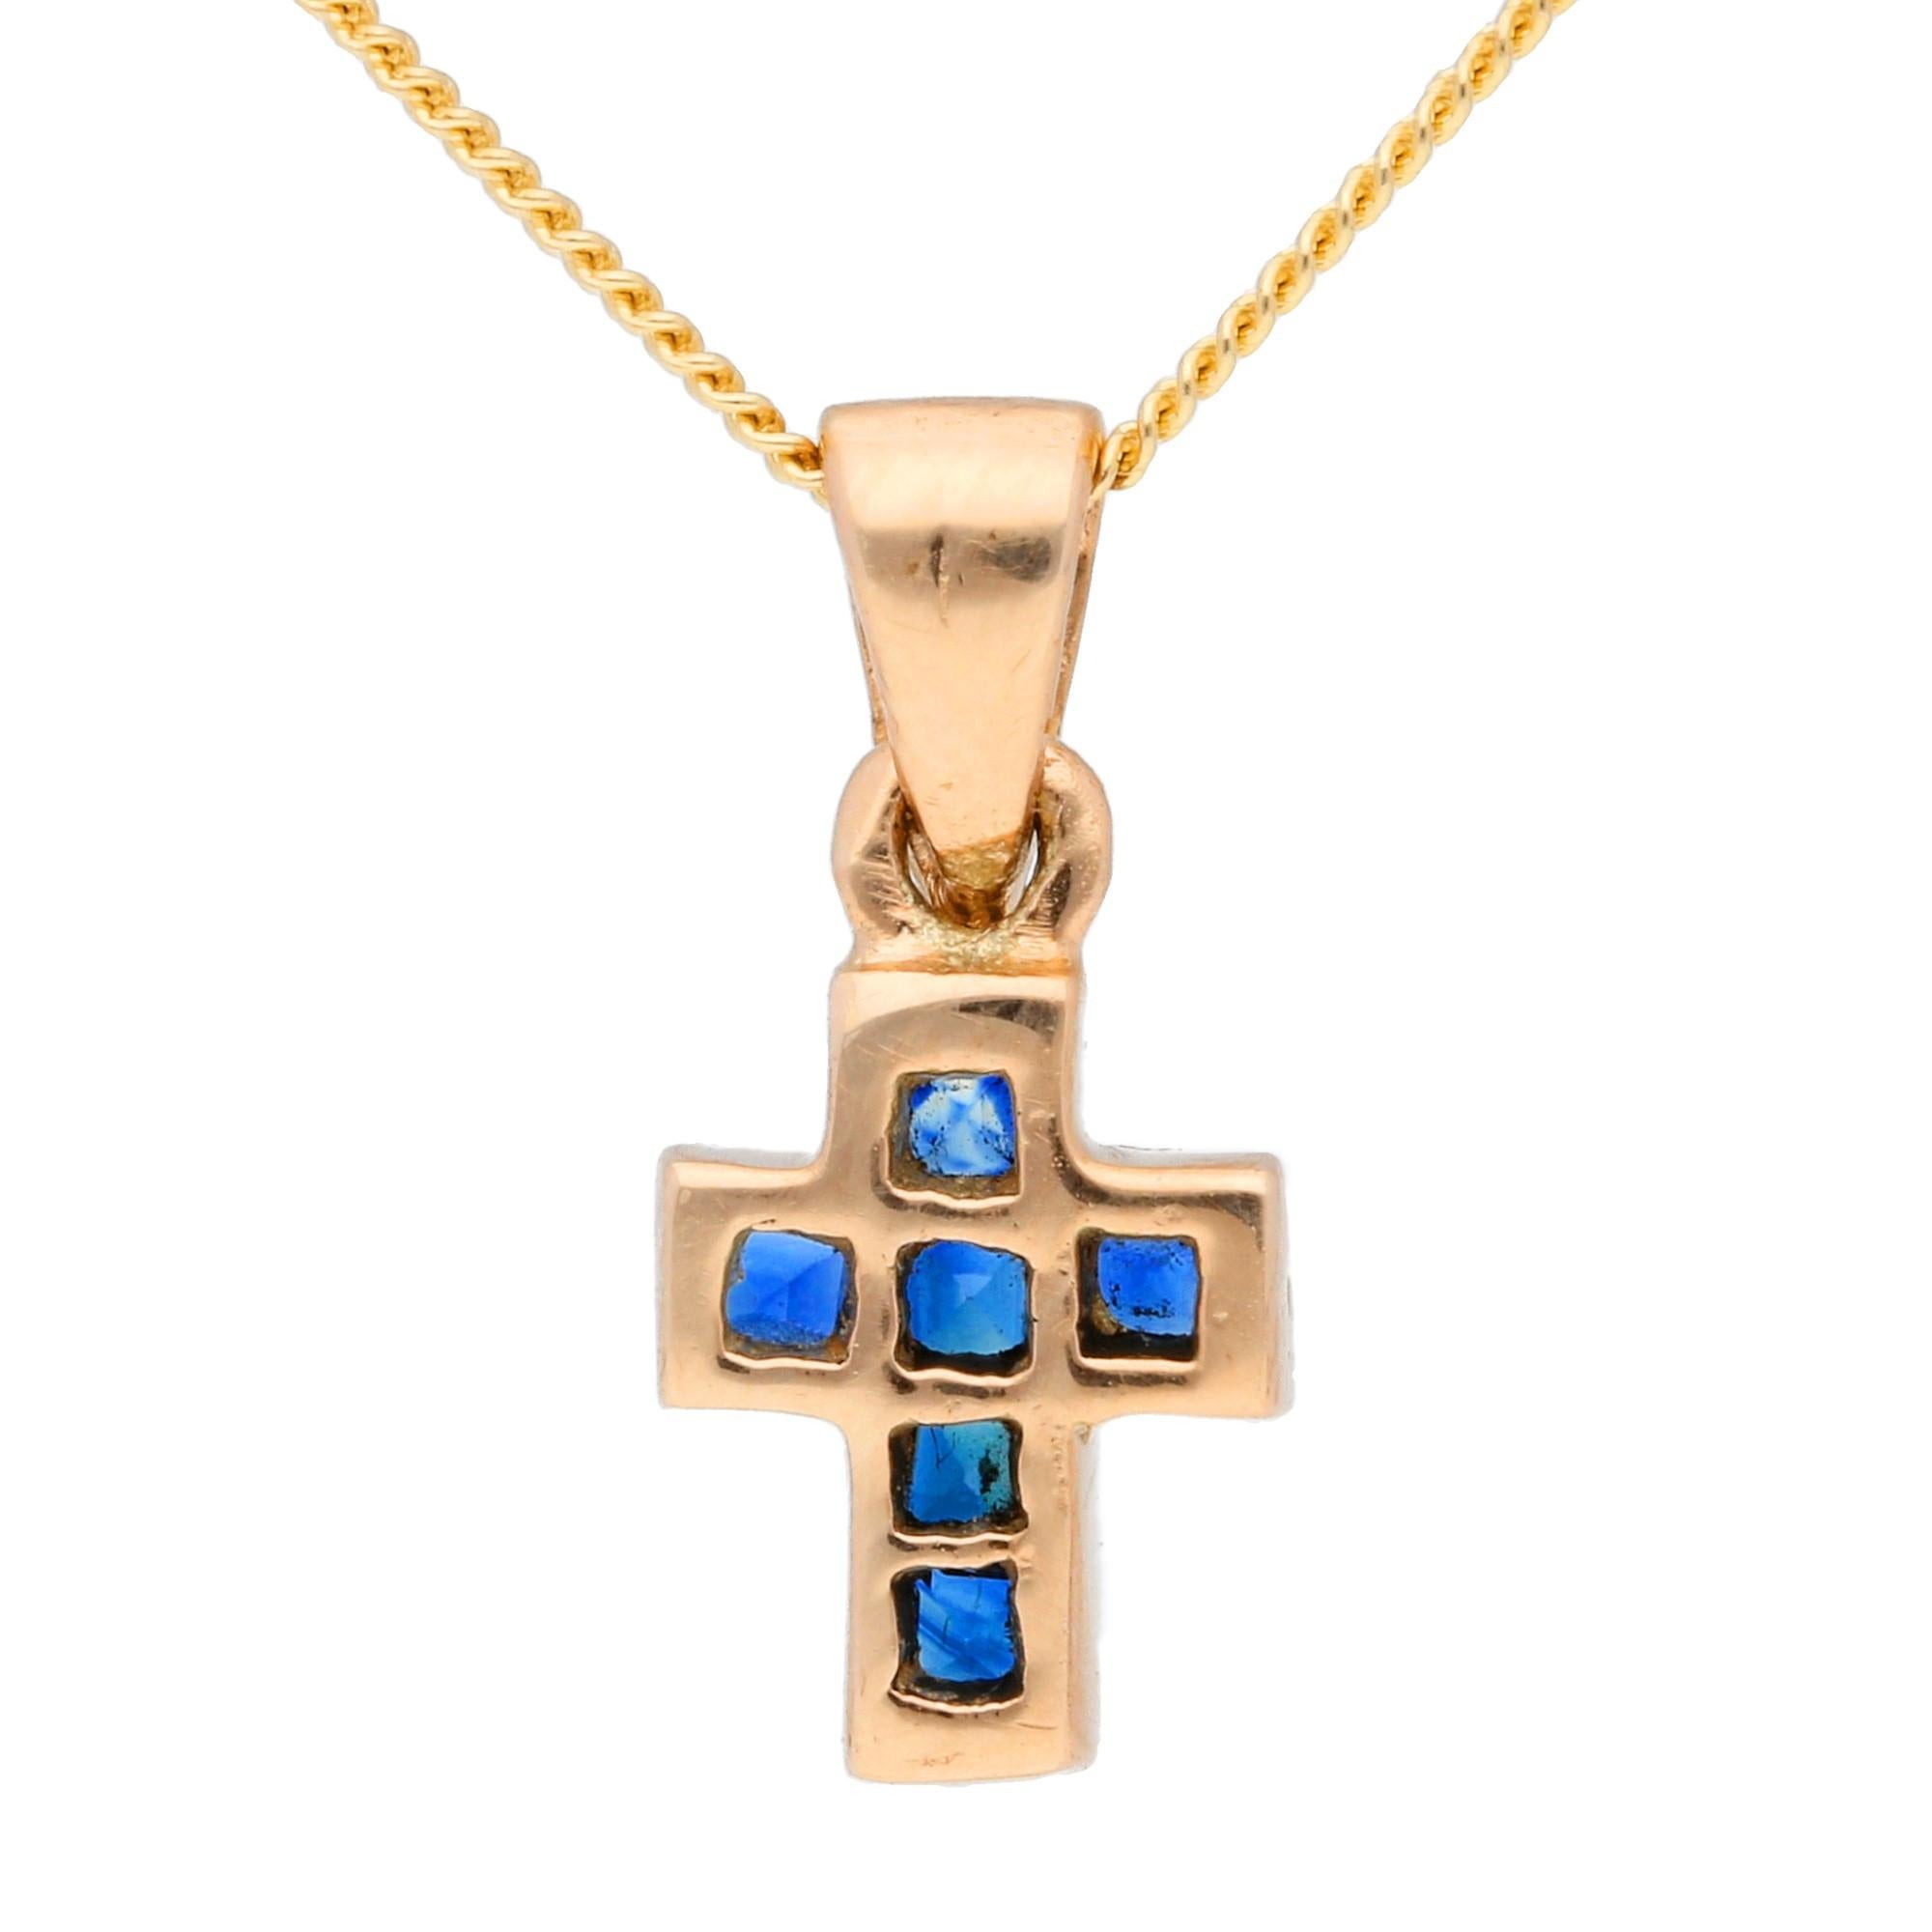 Petite and pretty, this ladies cross pendant. A gorgeous gift for a September birthday or a sapphire anniversary.

Featuring a rose gold cross, encrusted with luxurious sapphires, that hangs beautifully on the sleek curb chain. A simply beautiful